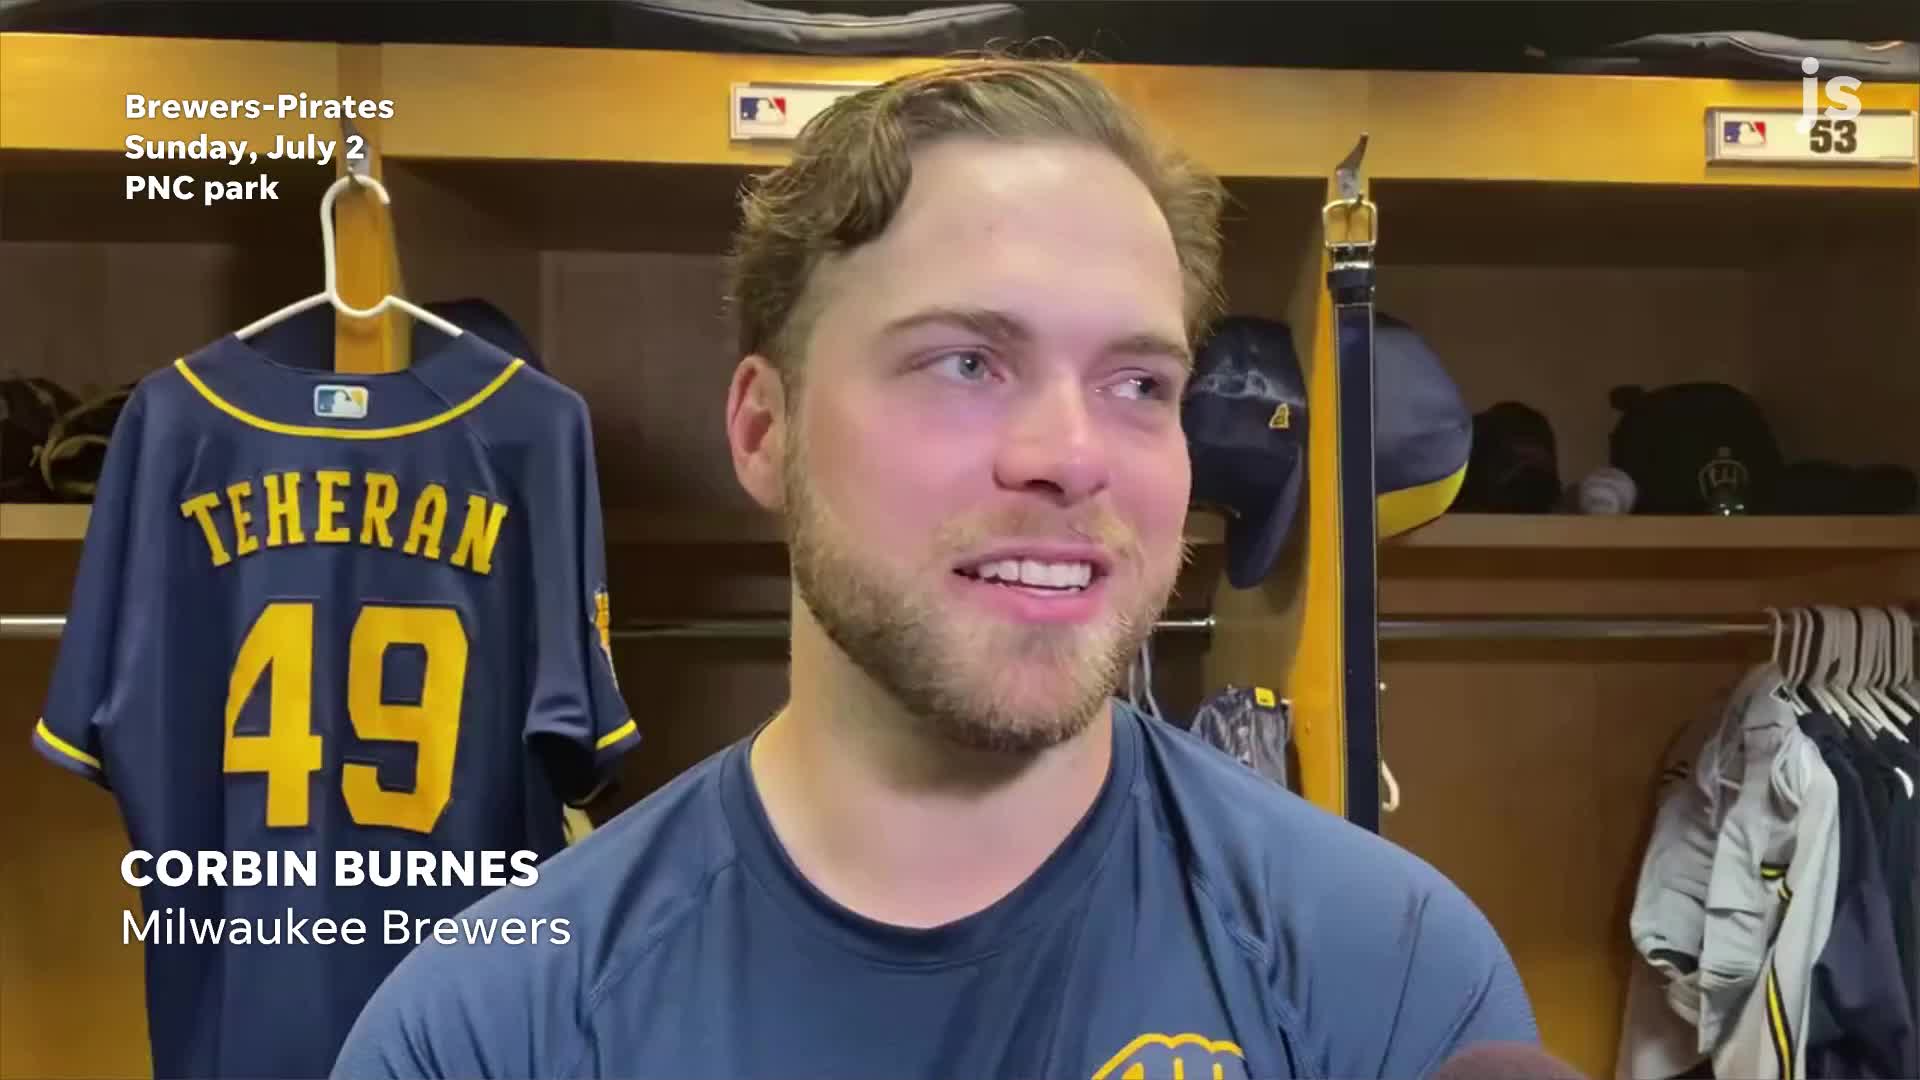 Here's what Corbin Burnes had to say about Christian Yelich's hot